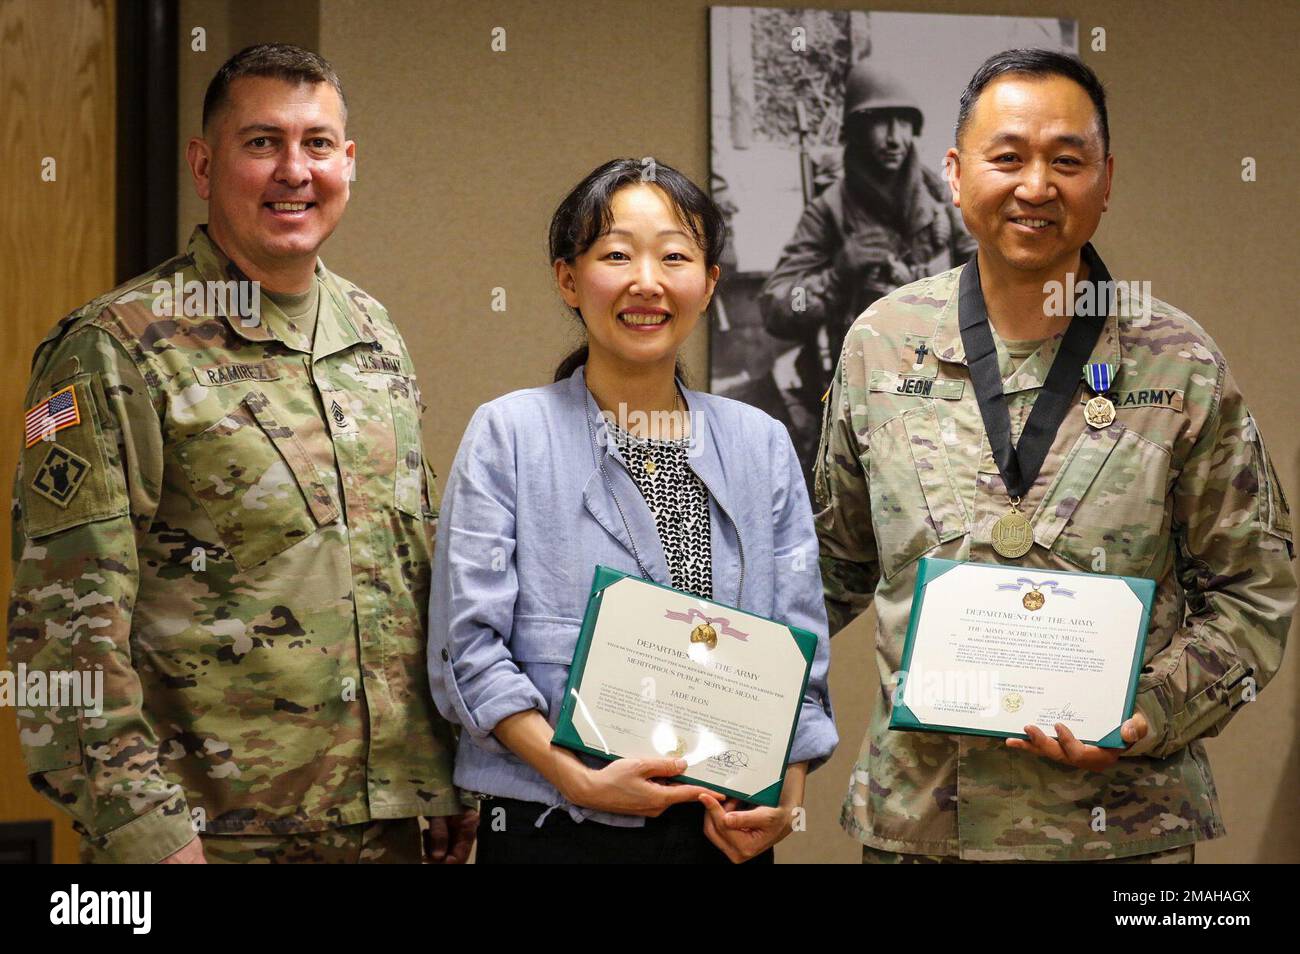 Lt. Col. Phillip Jeon, the Chaplain for 4th Cavalry Brigade, 1st Army Division East, receives the Order of Titus, an award that highlights the importance of realistic, doctrinally-guided combat ministry training in ensuring the delivery of prevailing religious support to Soldiers. The award was presented May 26, 2022 at Fort Knox, Ky. By Command Sgt. Maj. Raymond Ramirez, the Sergeant Major of 4th Cavalry Brigade. Chaplain Jeon’s wife Jade was also awarded the Meritorious Public Service Medal for her outstanding commitment to the Brigade. Stock Photo